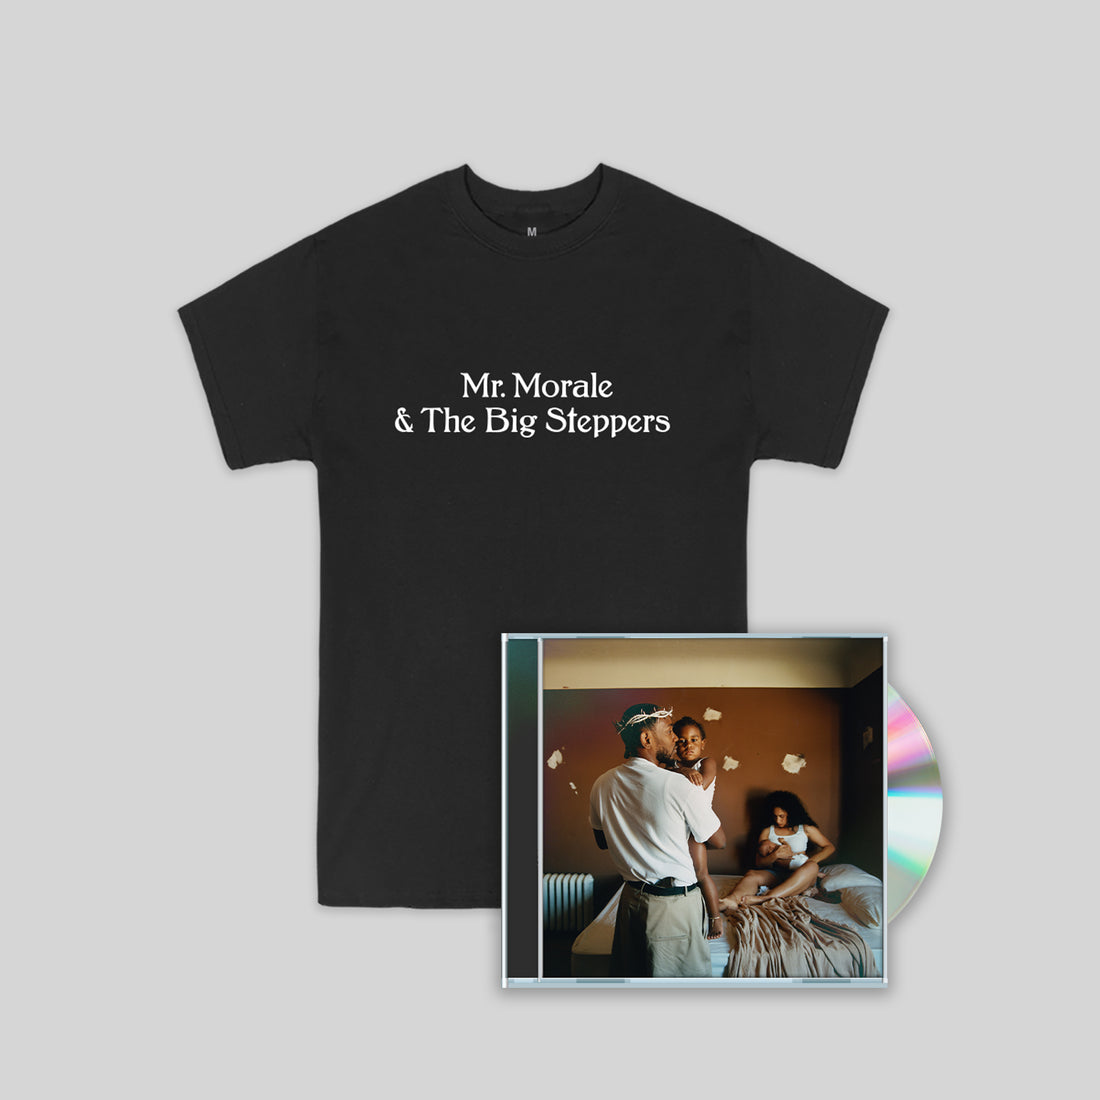 Mr. Morale & The Big Steppers (CD+Store Exclusive Black T-Shirt)